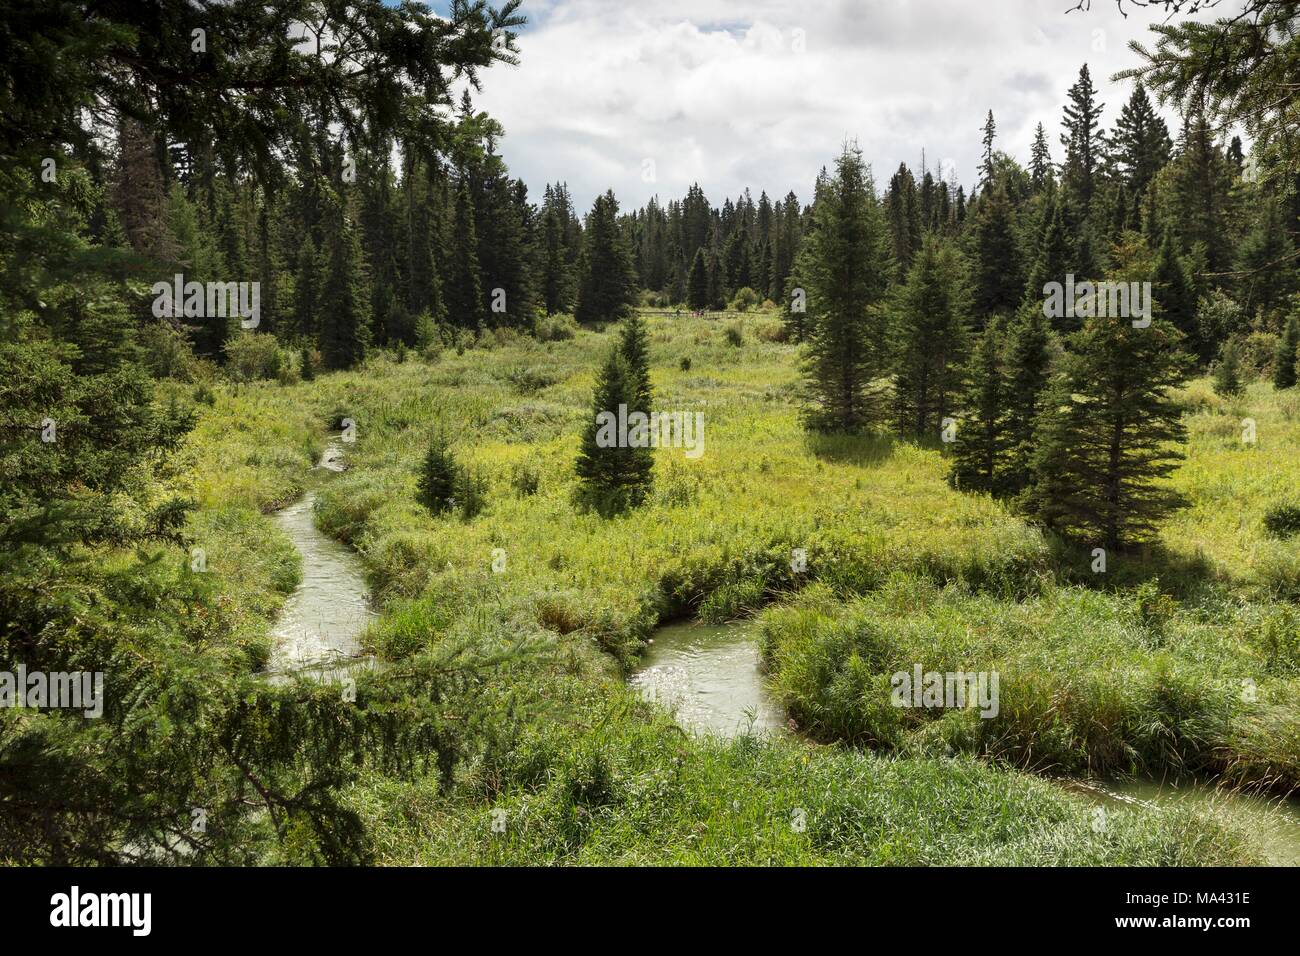 A hiking trail through a forest with a stream running through it in the Mountain National Park, Canada Stock Photo